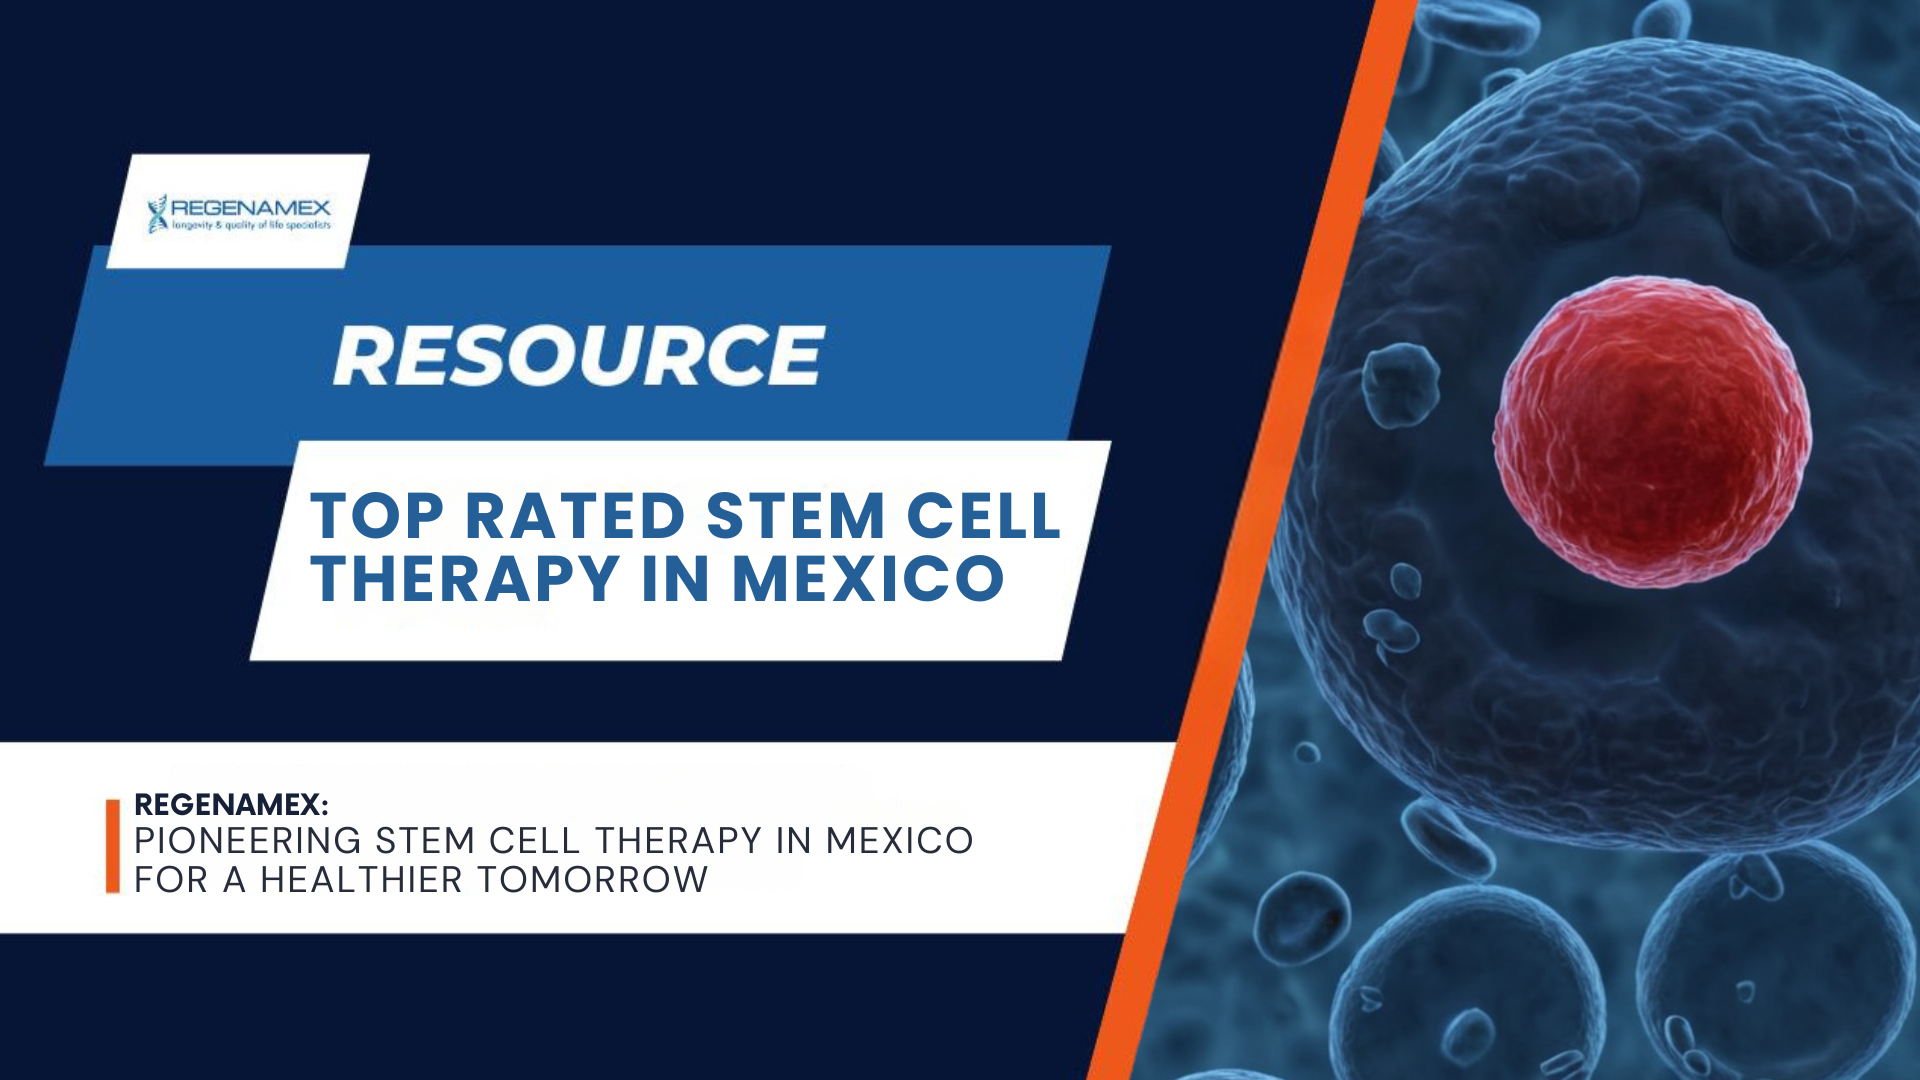 Top rated stem cell